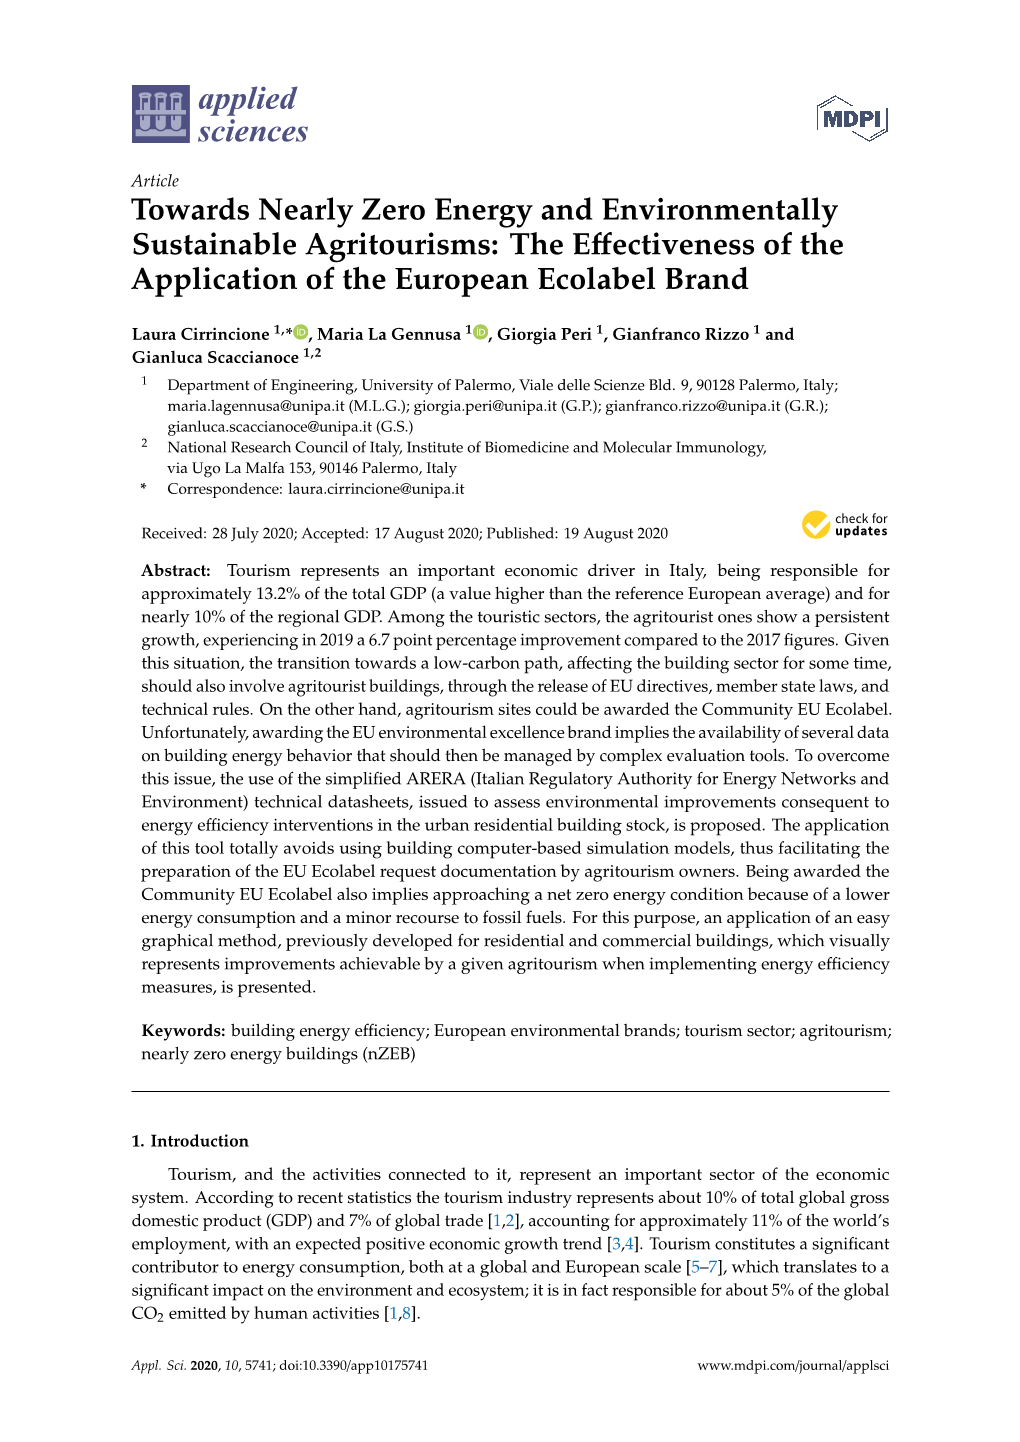 Towards Nearly Zero Energy and Environmentally Sustainable Agritourisms: the Effectiveness of the Application of the European Ec